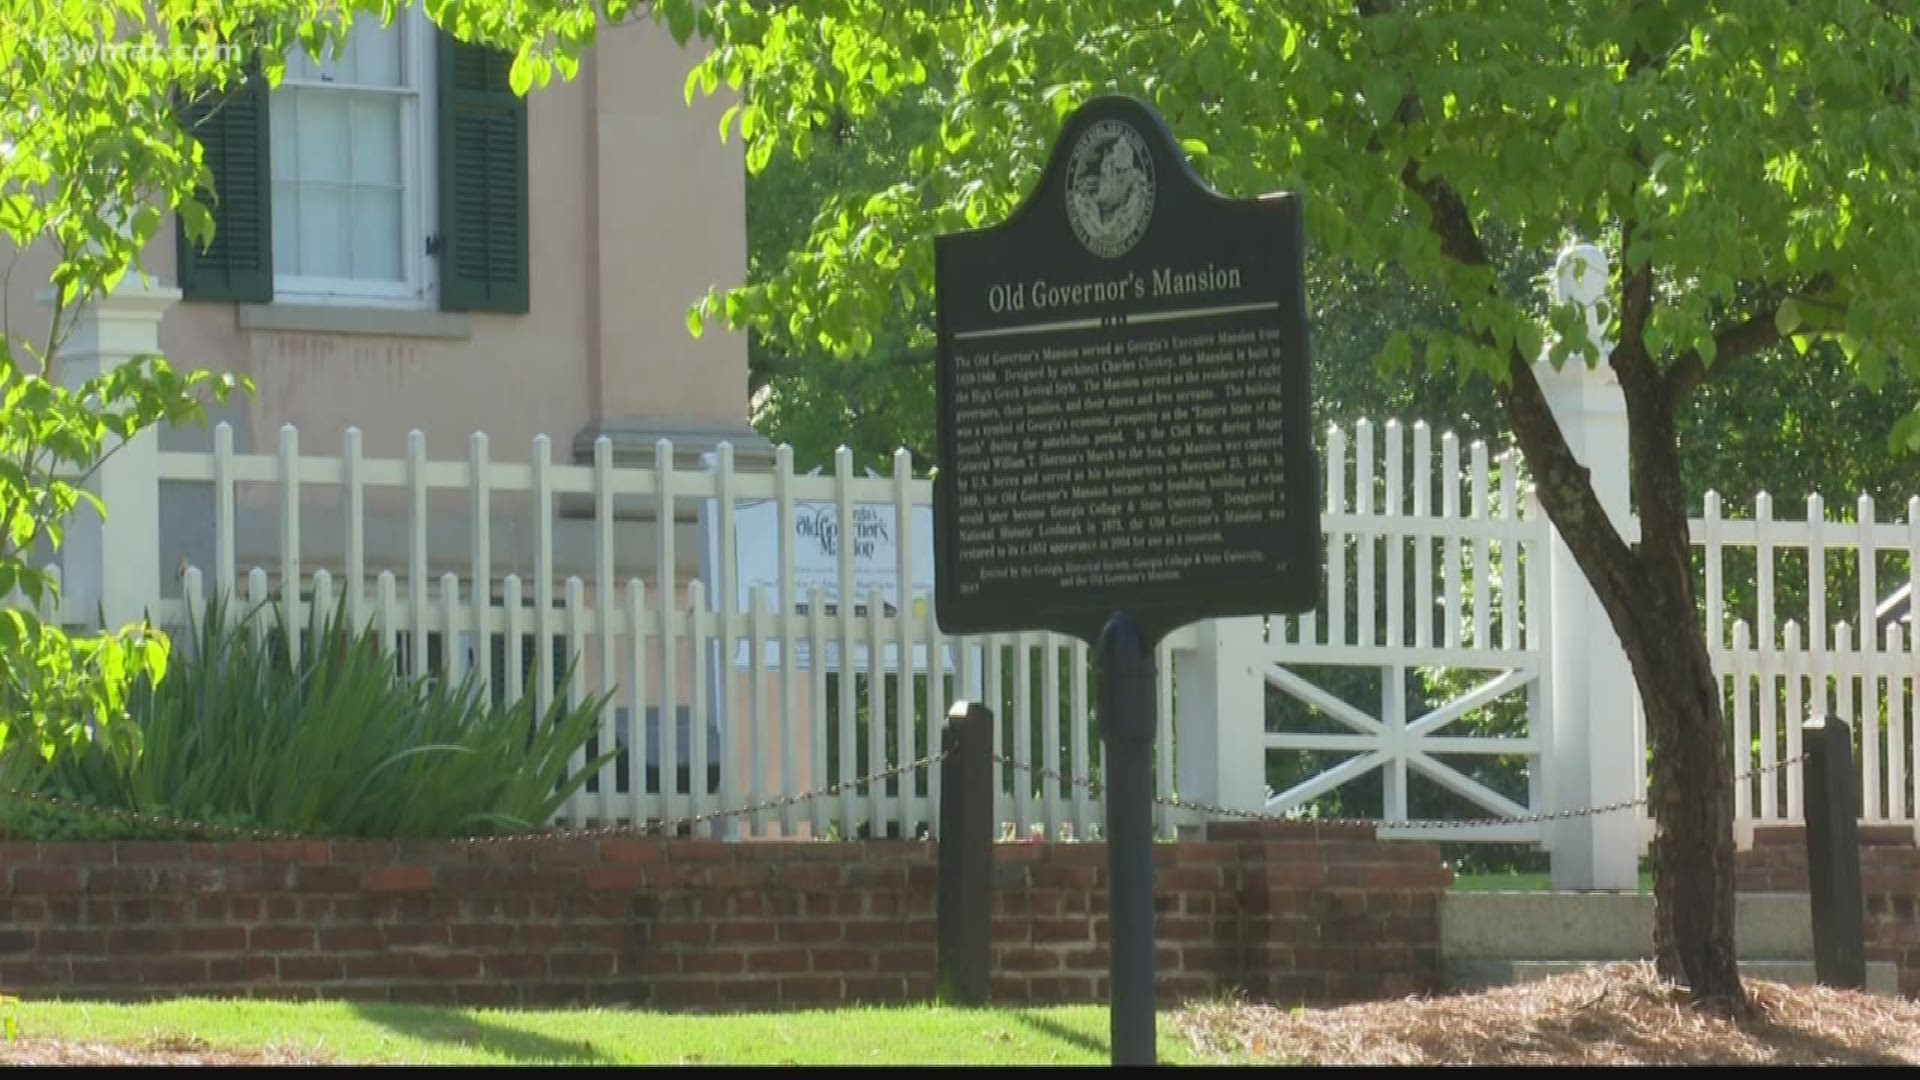 A post by Georgia's Old Capital Museum at the Depot has been getting a lot of attention on social media. The post says, "Did you know that Milledgeville is the only city in the U.S., with the exception of Washington D.C., actually designed to be a capital city?" So we set out to VERIFY if this is true.